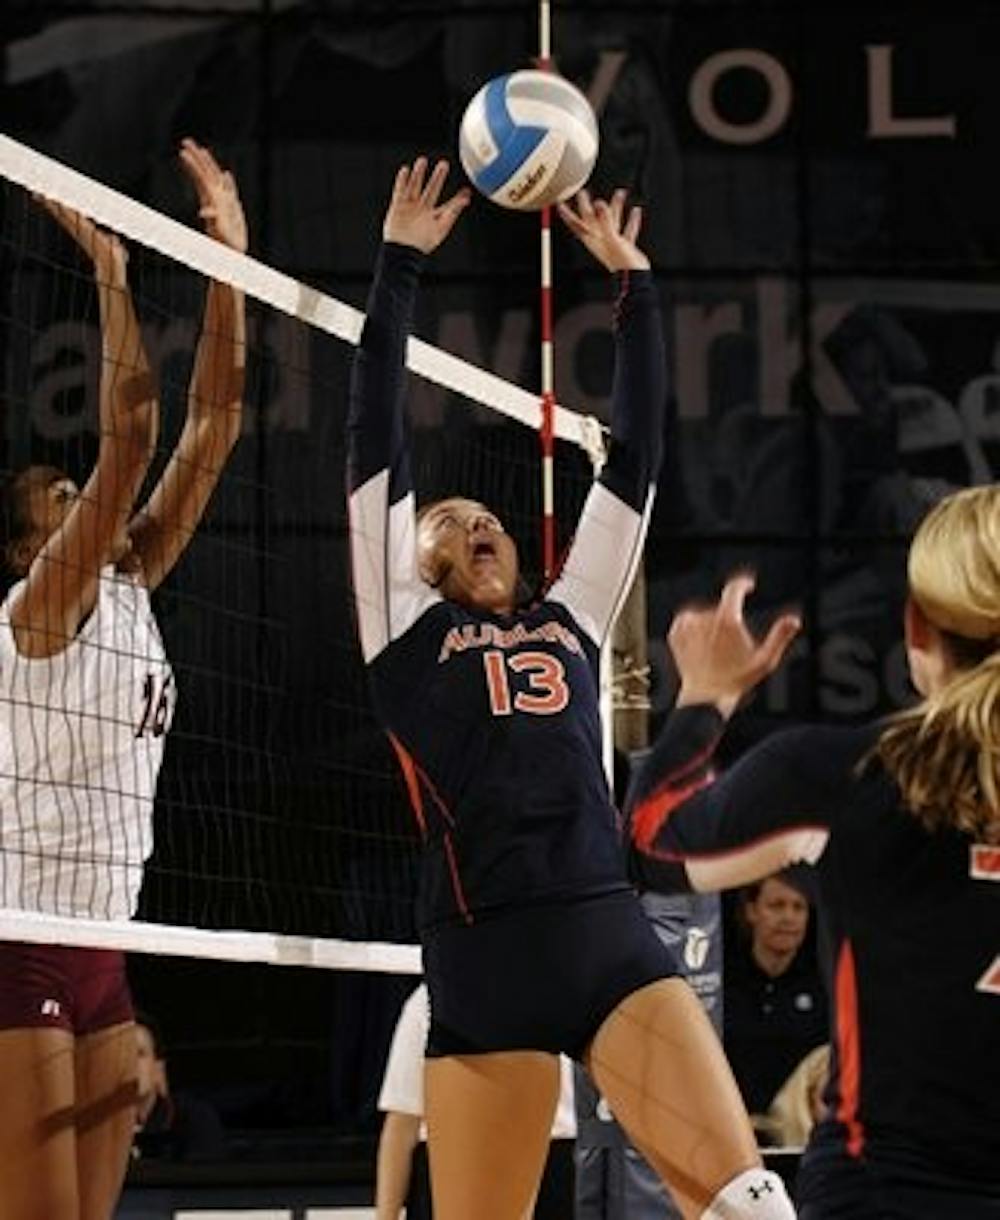 Solverson has 725 assists on the women's volleyball team. (Todd Van Emst / Media Relations)